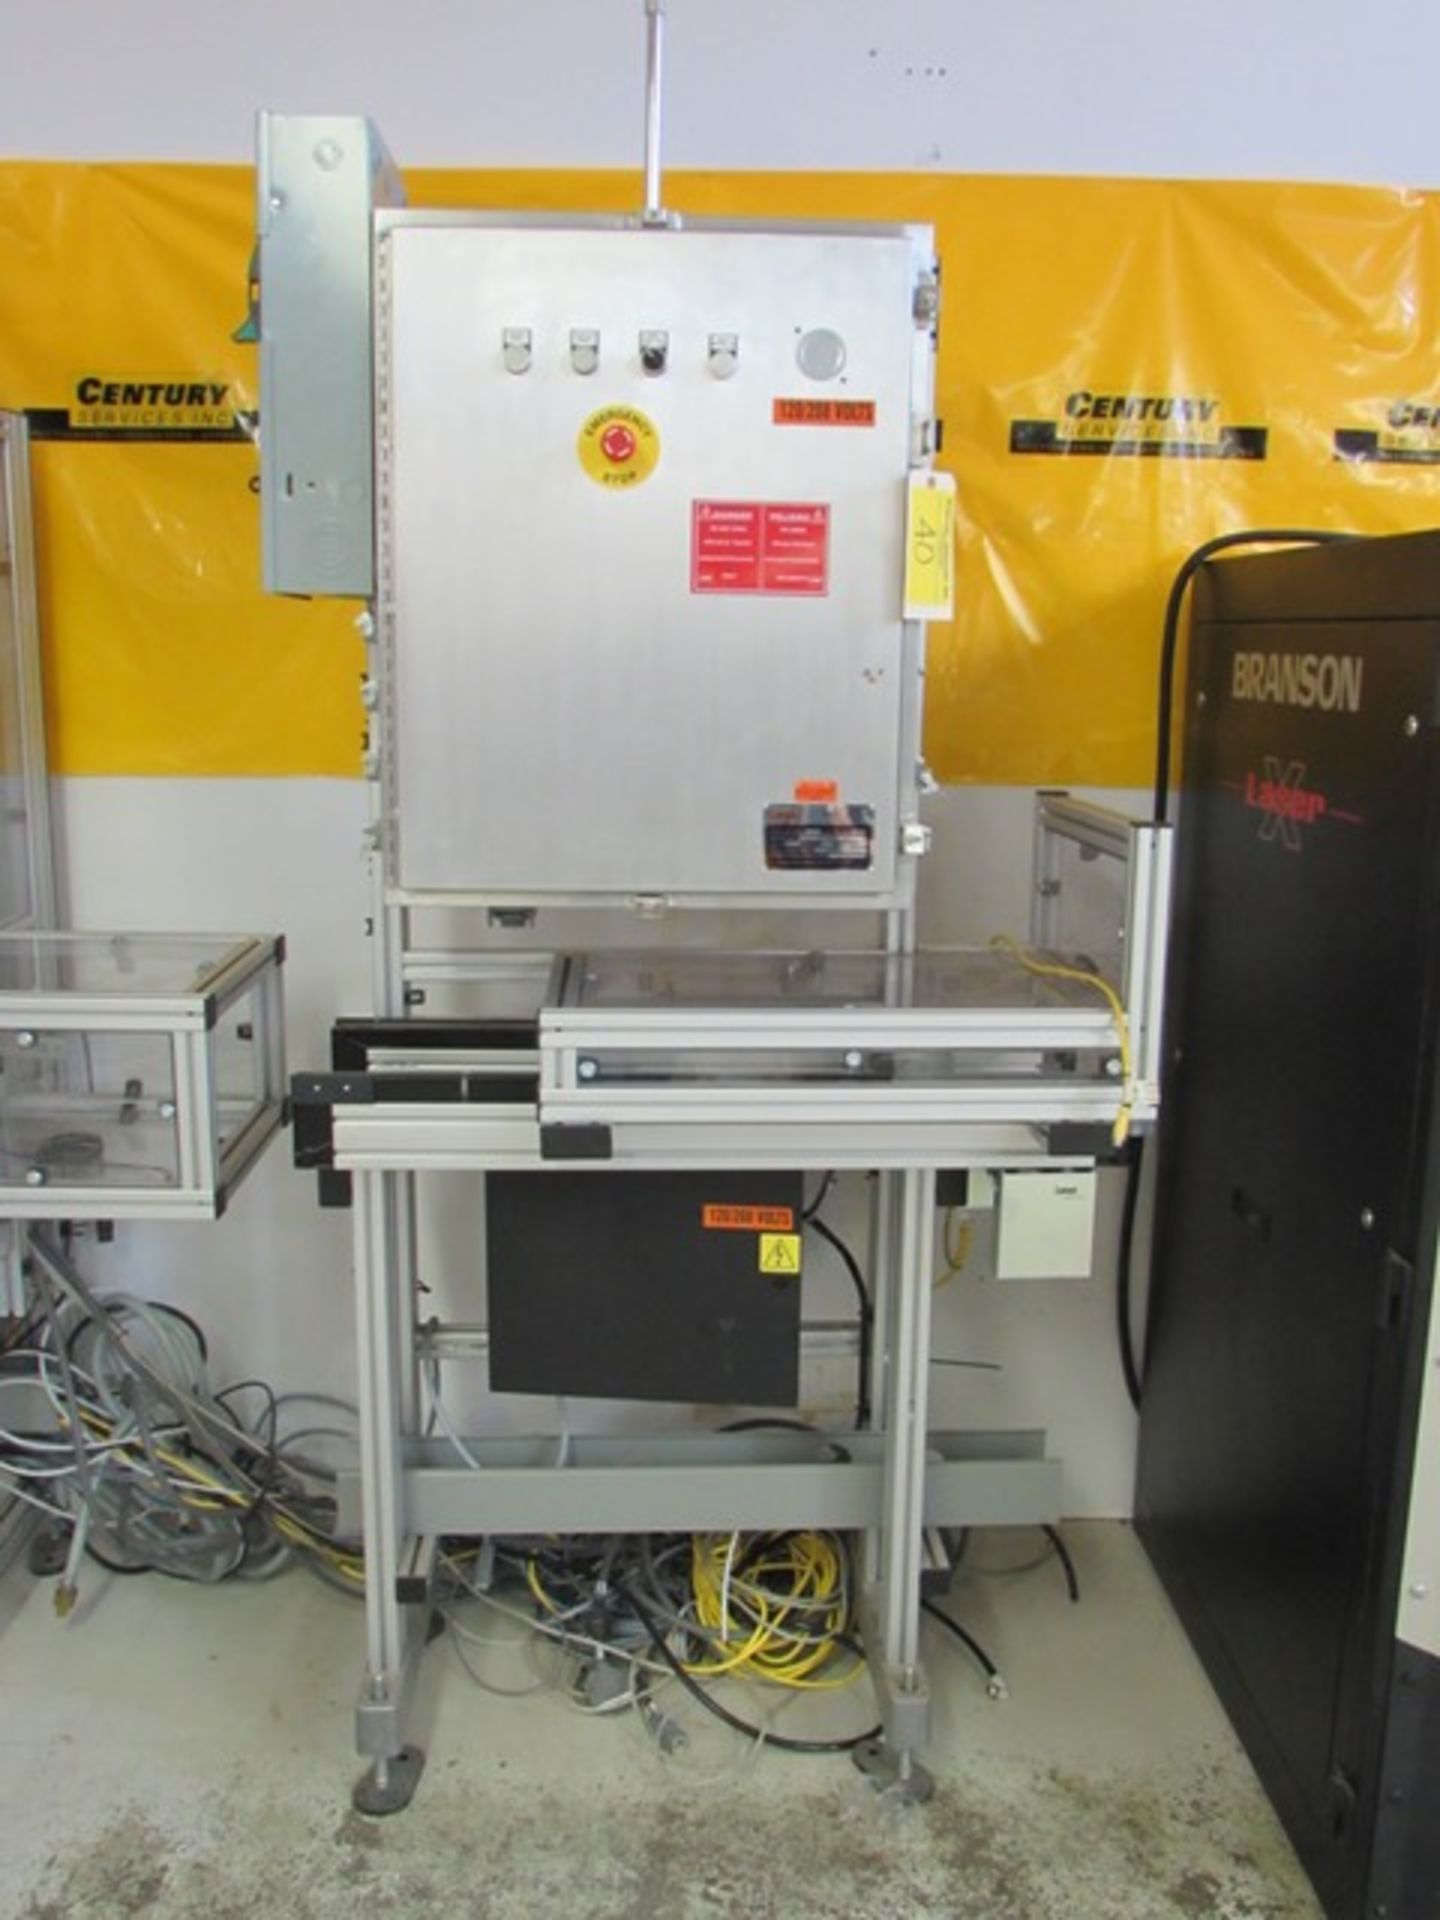 2011 Branson laser welding system equipment c/w  Radiance 3G bench-top controller with 2-laser - Image 9 of 13